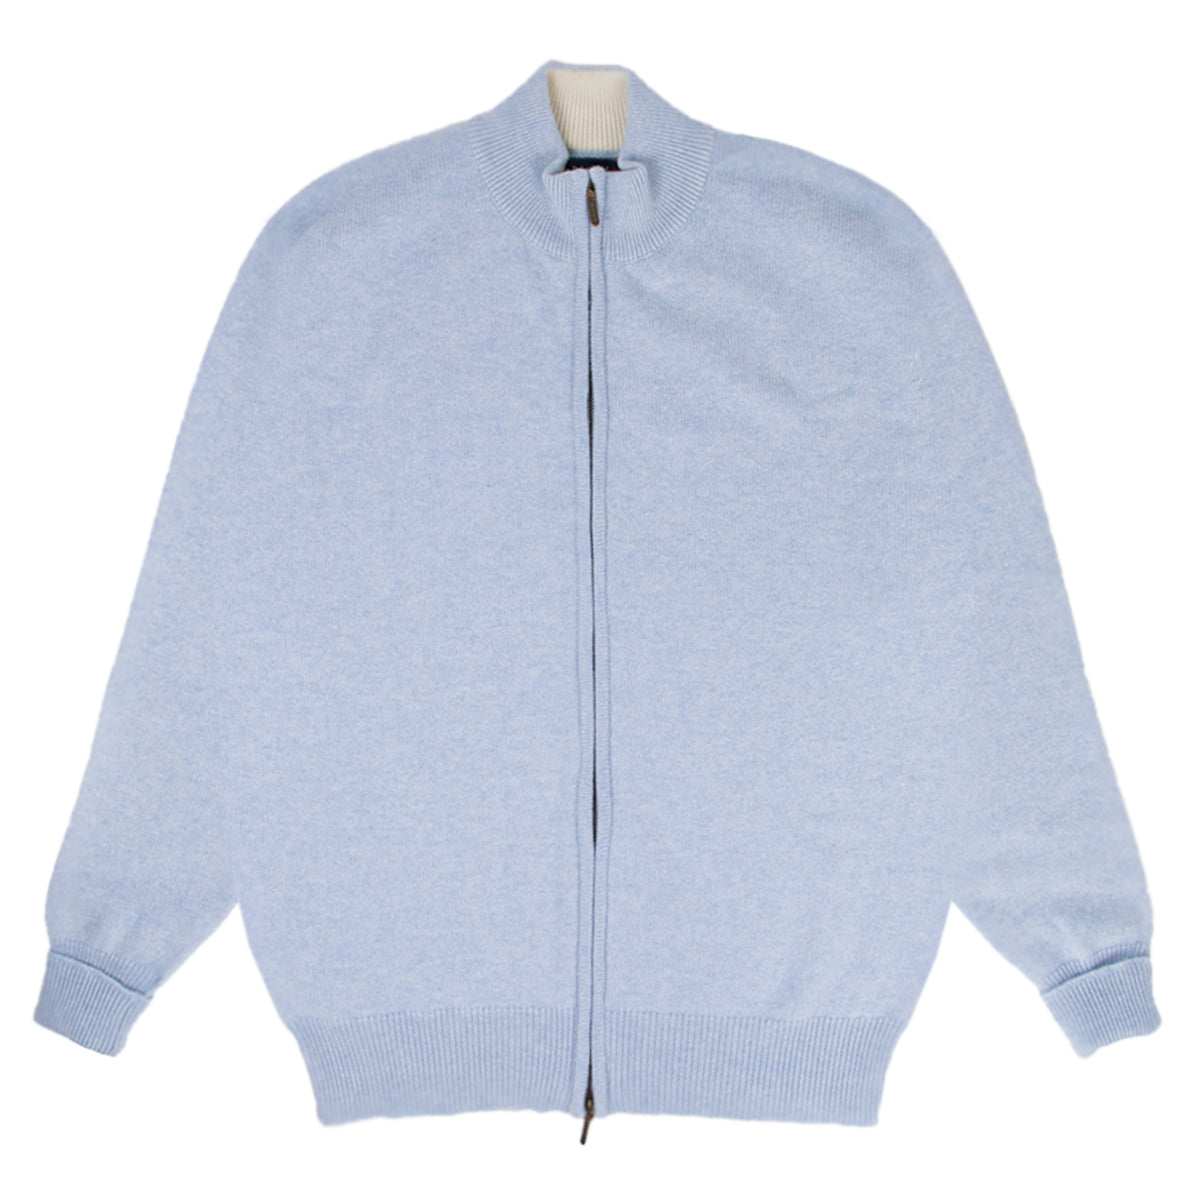 The Barra 4ply Full Zip Cashmere Cardigan - Atollo Blue / White Undyed  Robert Old   